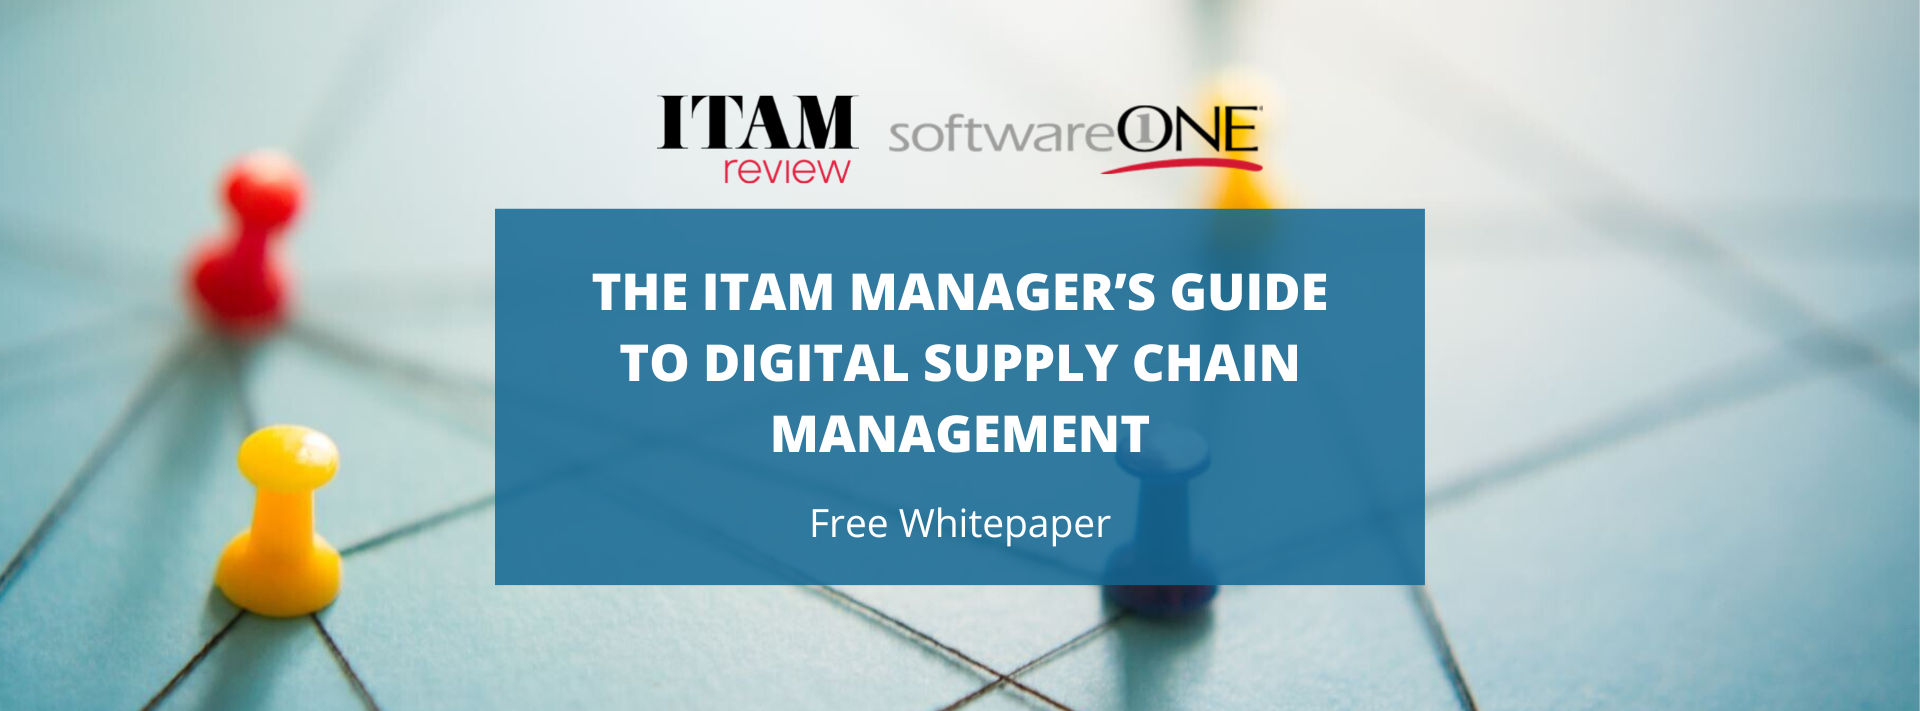 The ITAM Manager's Guide to Digital Supply Chain Management (white paper)